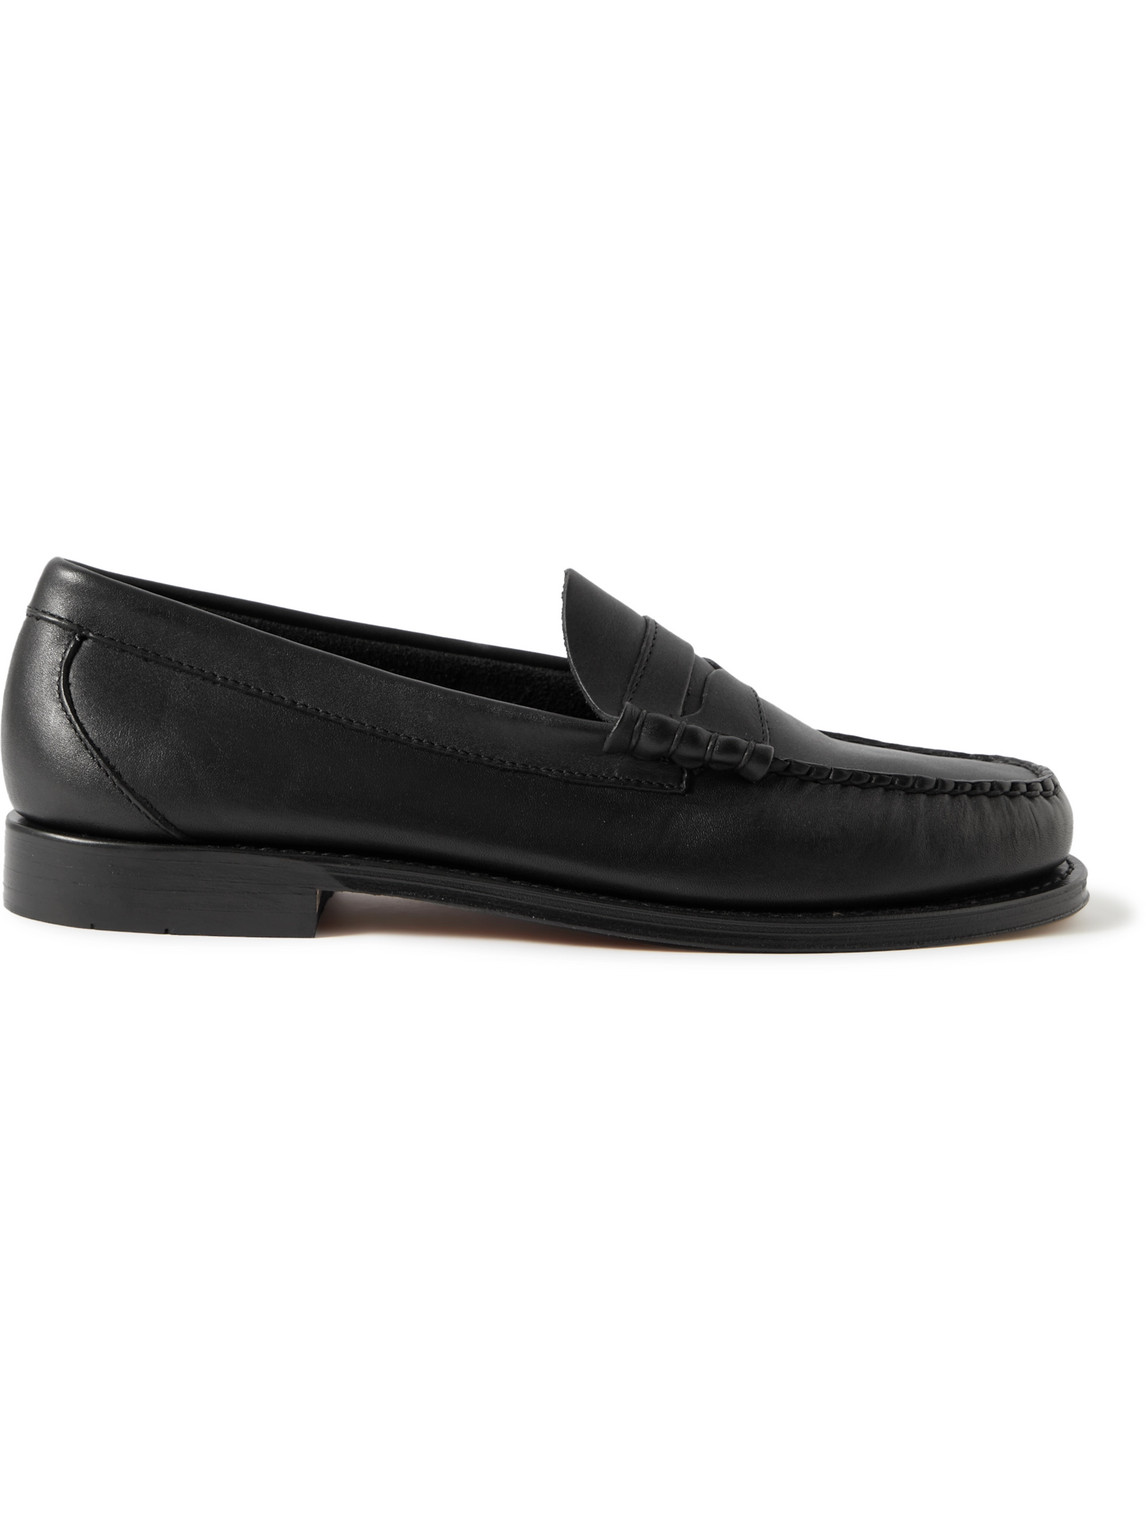 G.H. Bass & Co. - Weejuns Heritage Larson Leather Penny Loafers - Men - Black - UK 8 von G.H. Bass & Co.